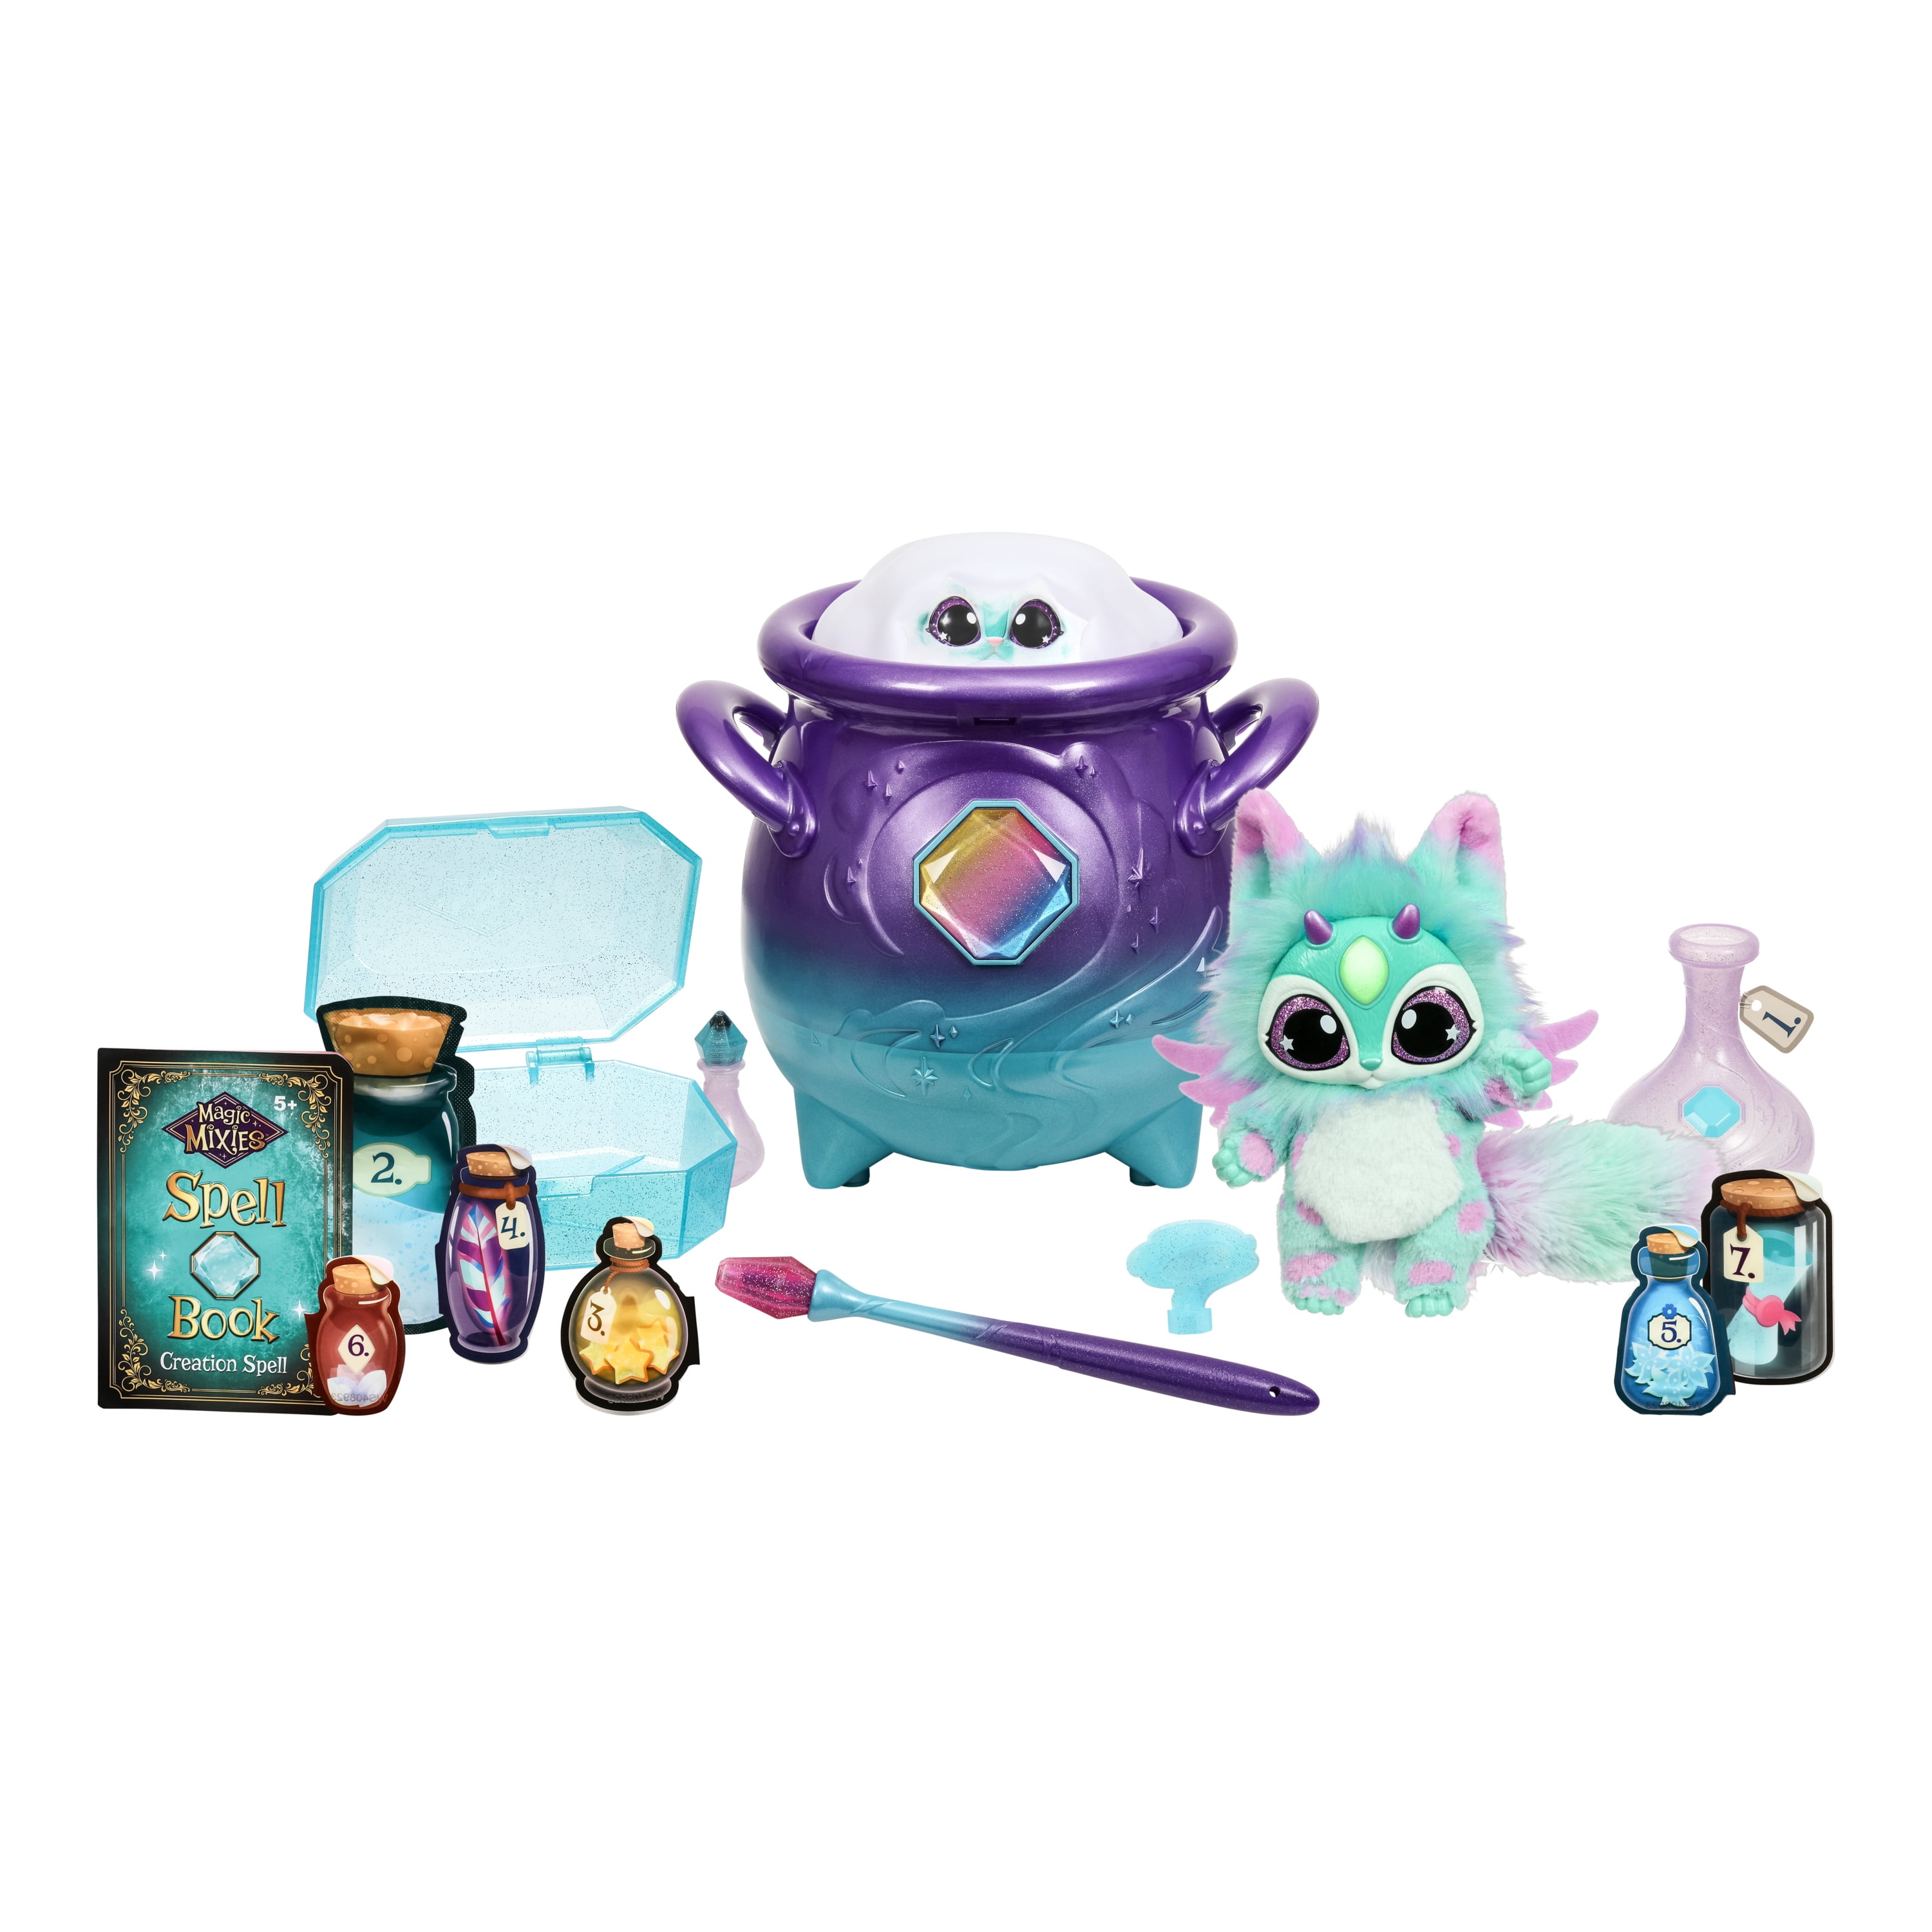 Magic Mixies Magical Misting Cauldron with Interactive 8 Pink Plush Toy -  New